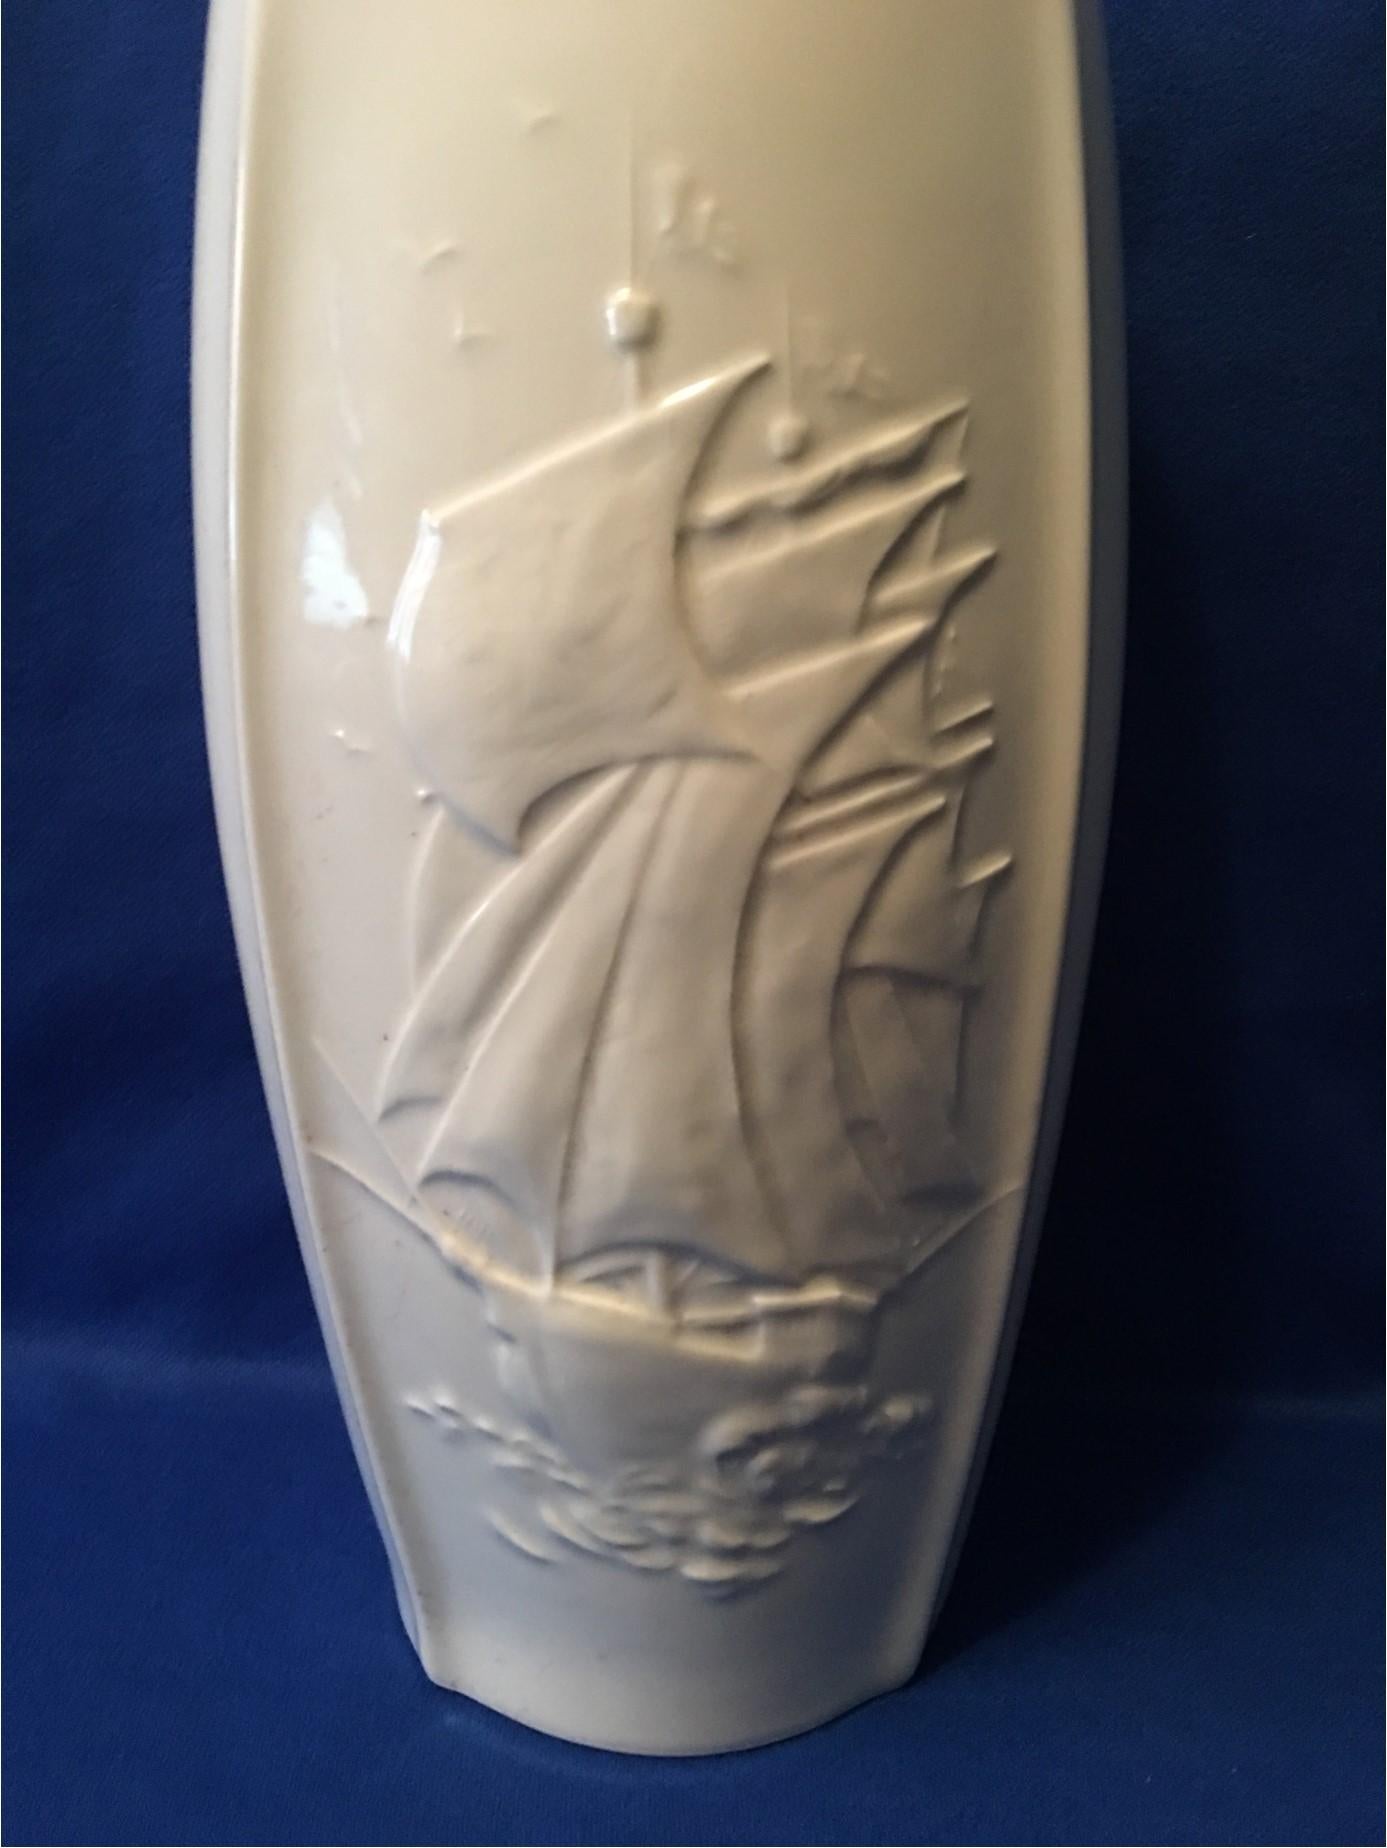 Very lovely glazed porcelain vase manufactured by Schuman of Arzberg in the state of Bavaria in Germany. From the 1960s. It depicts a beautiful maritime sea scene of a sailing ship sailing with all of its sails hoisted into the wind. A very nice